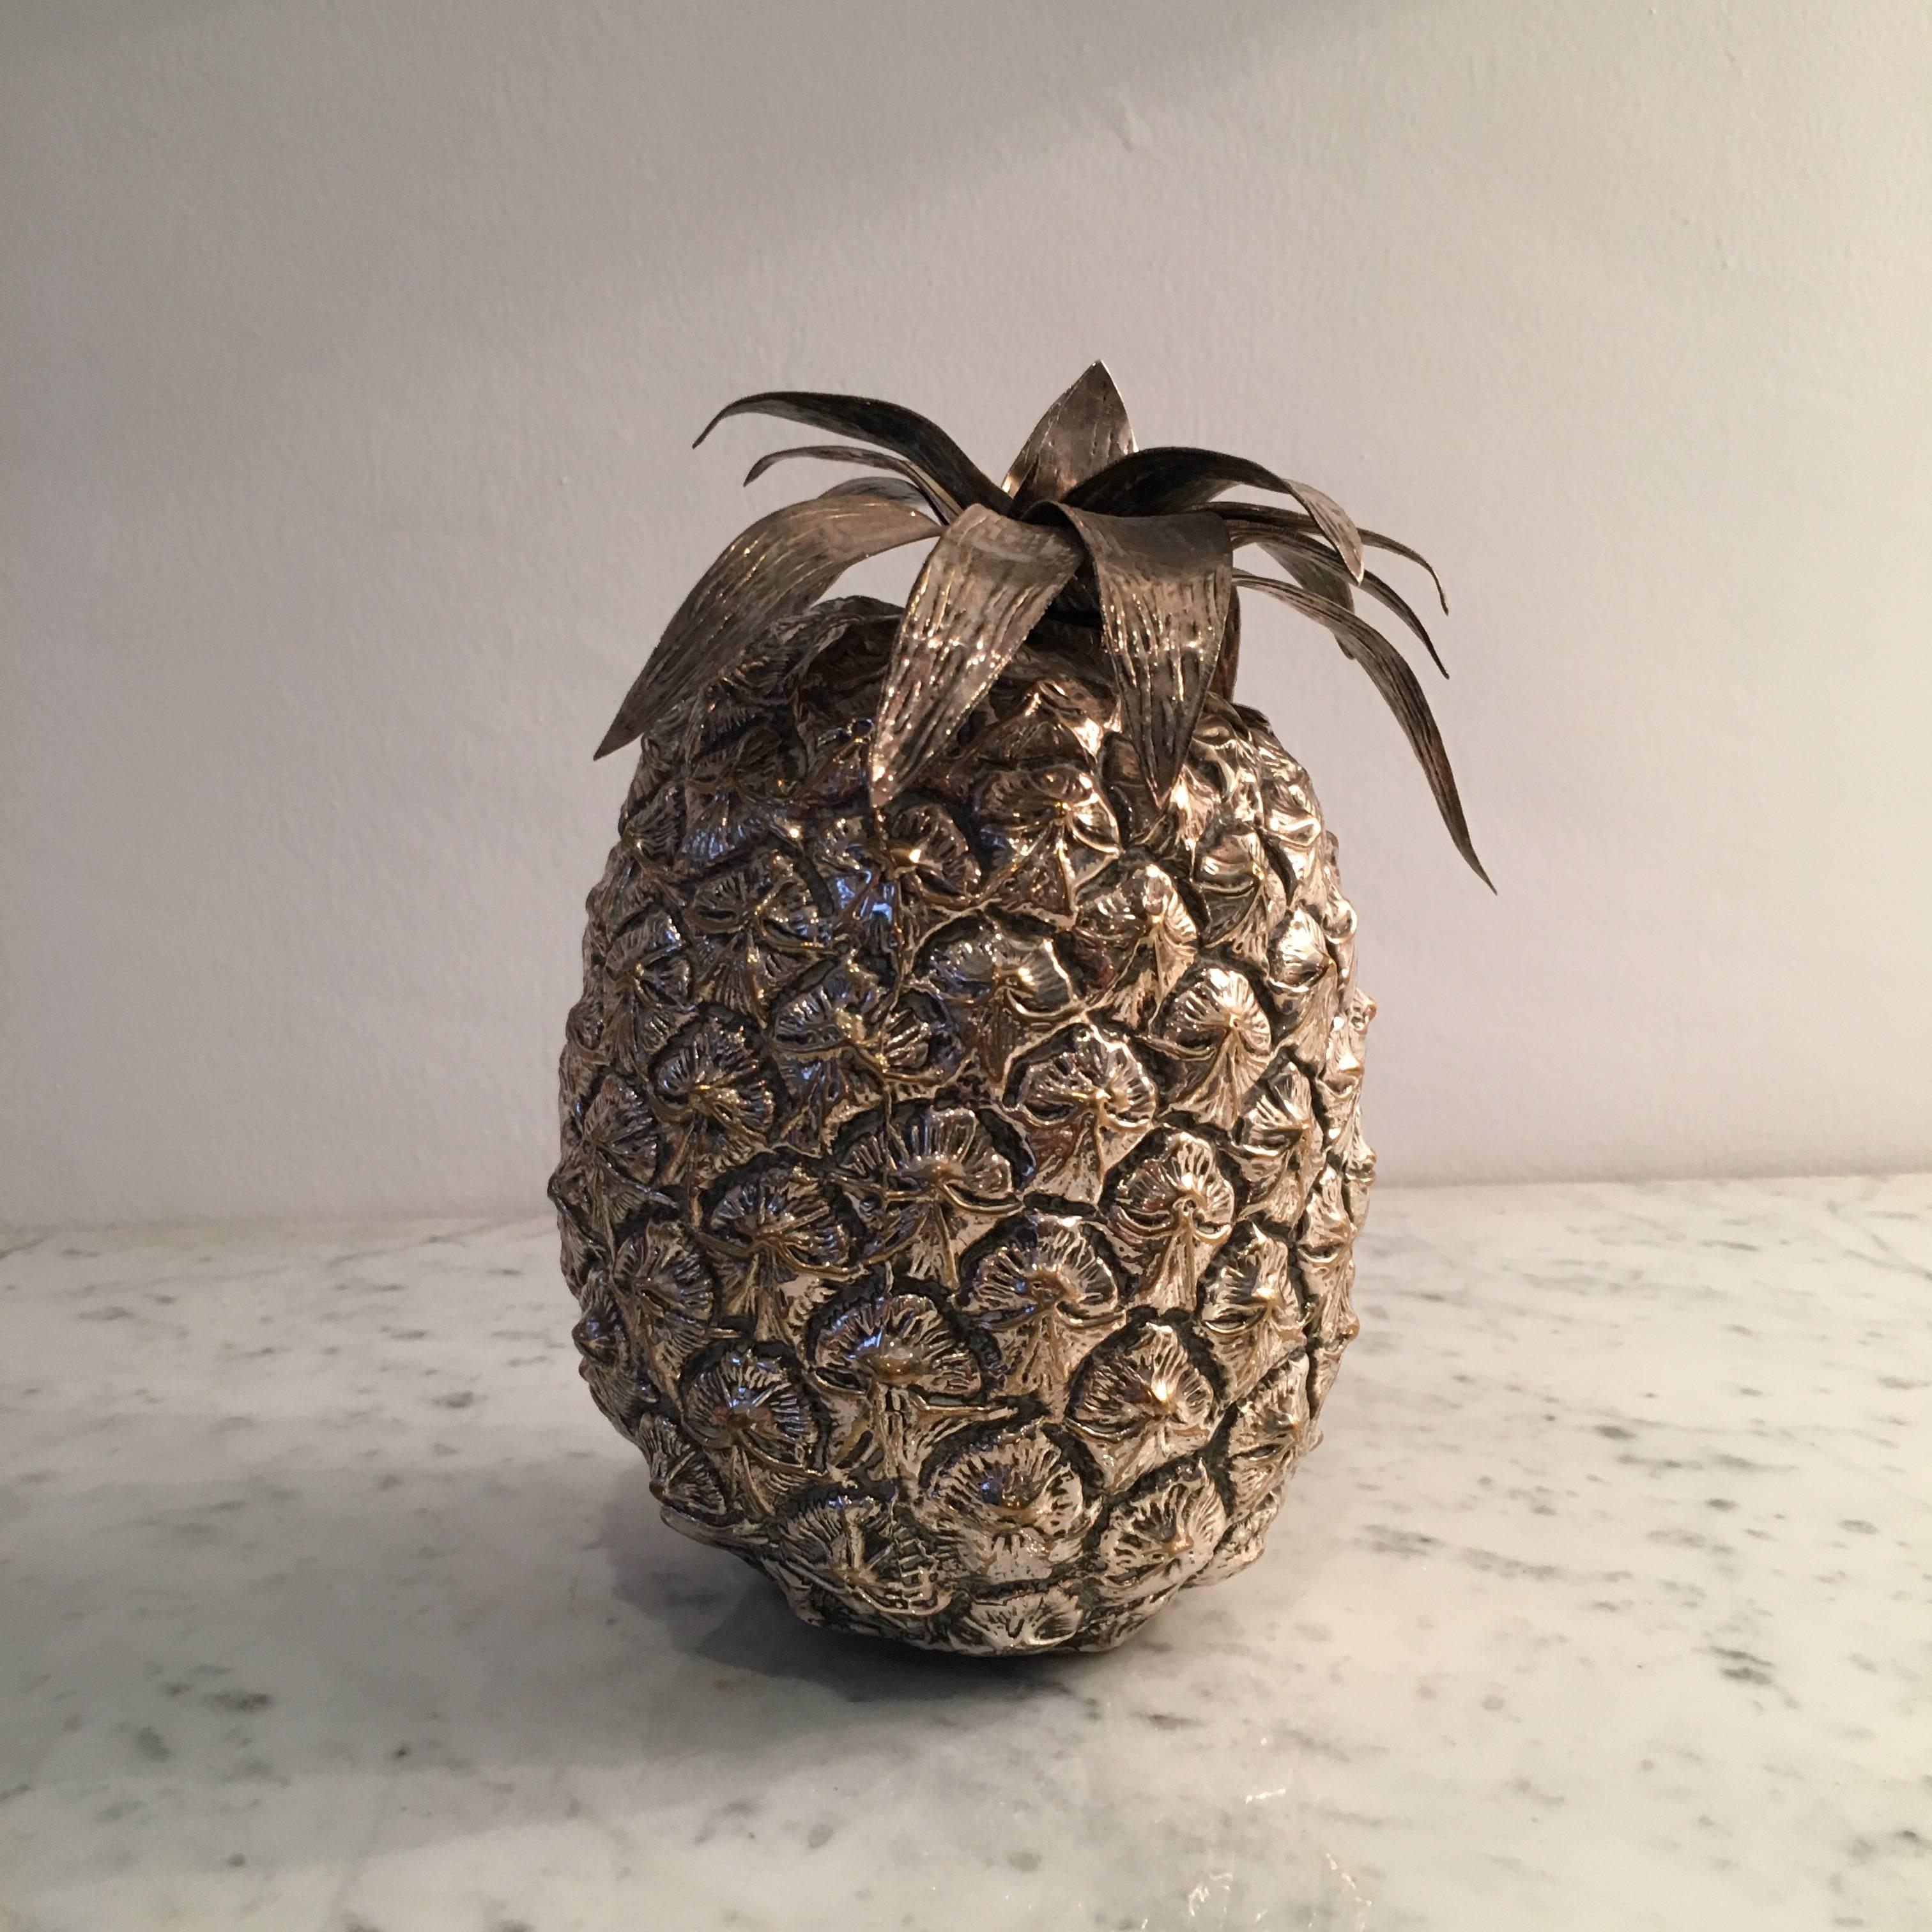 Italian Pair of Pineapple Sculpture by Mauro Manetti, Italy, circa 1960